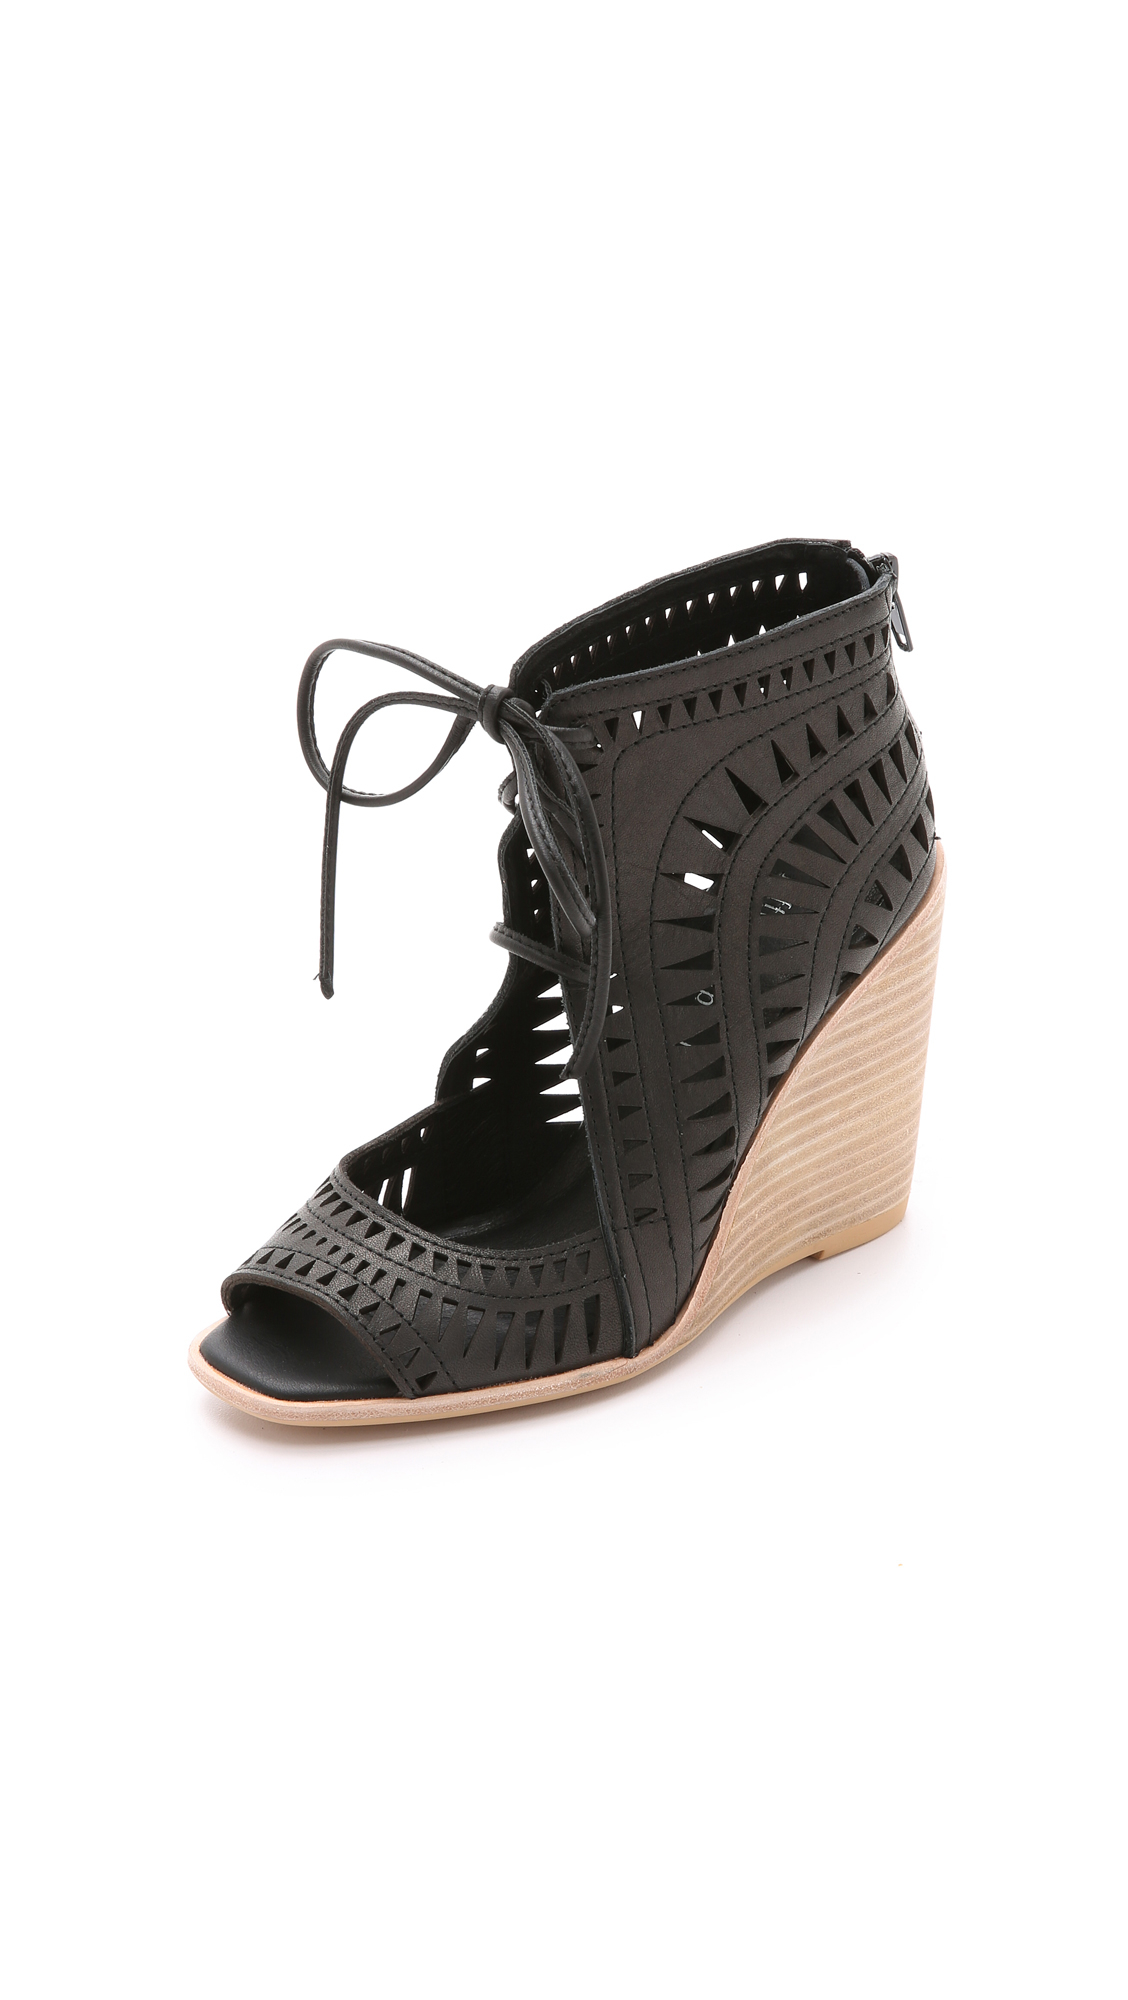 Jeffrey Campbell Rodillo Wedge Sandals - Nude in Black - Lyst